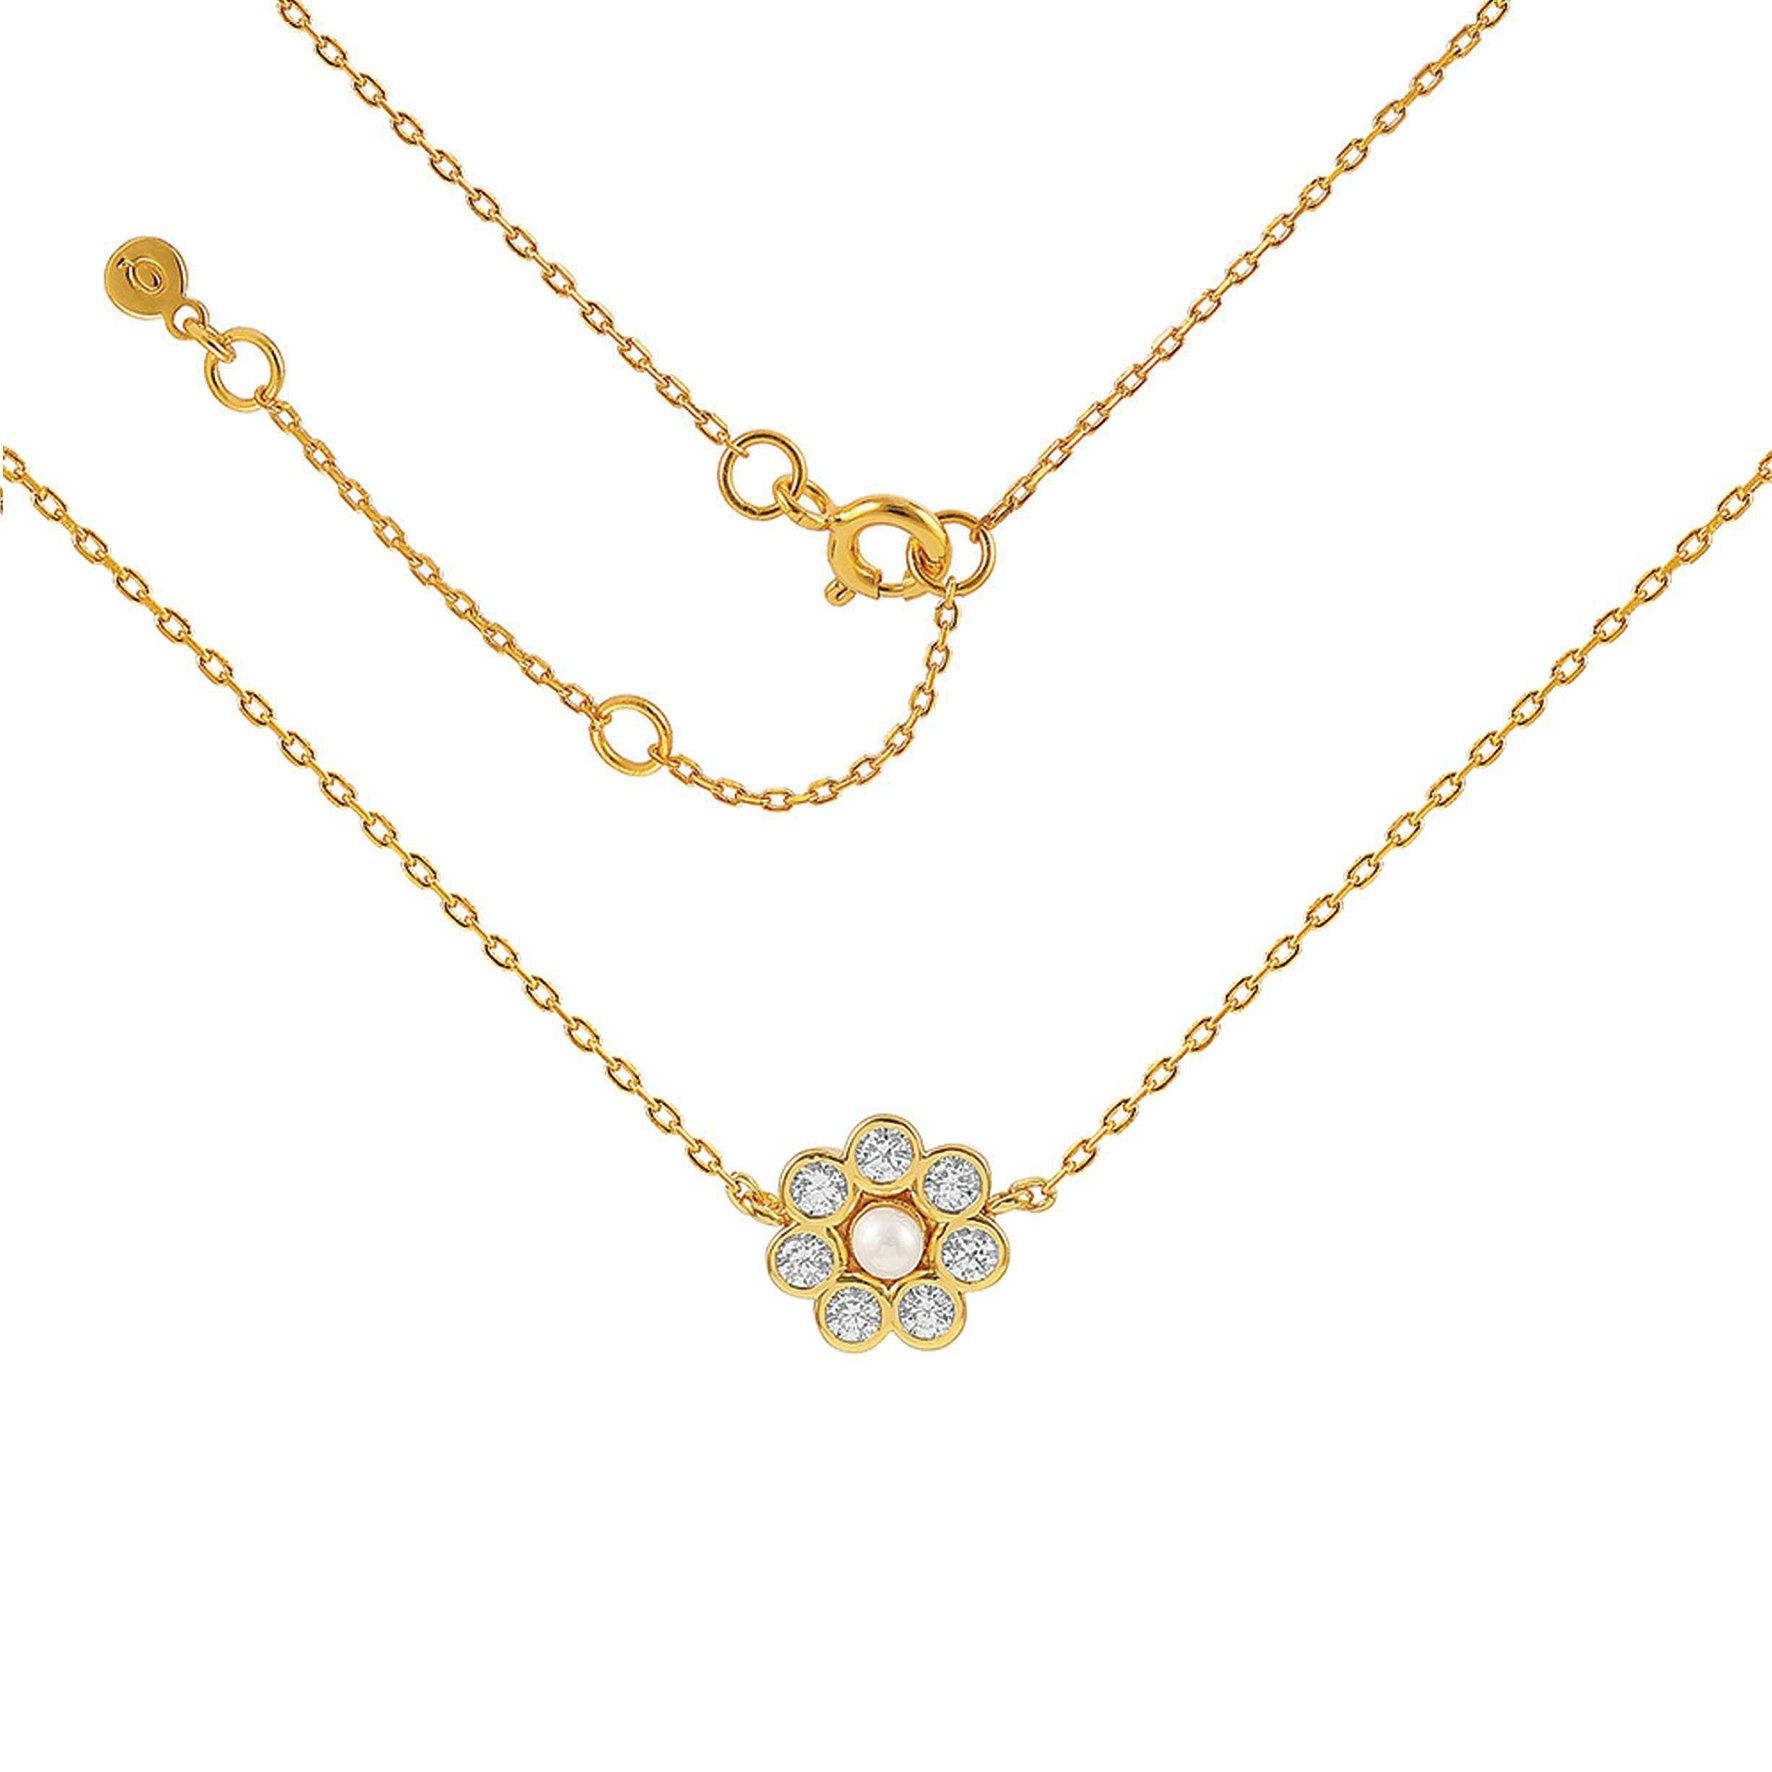 Aya Necklace from Hultquist Copenhagen in Goldplated-Silver Sterling 925